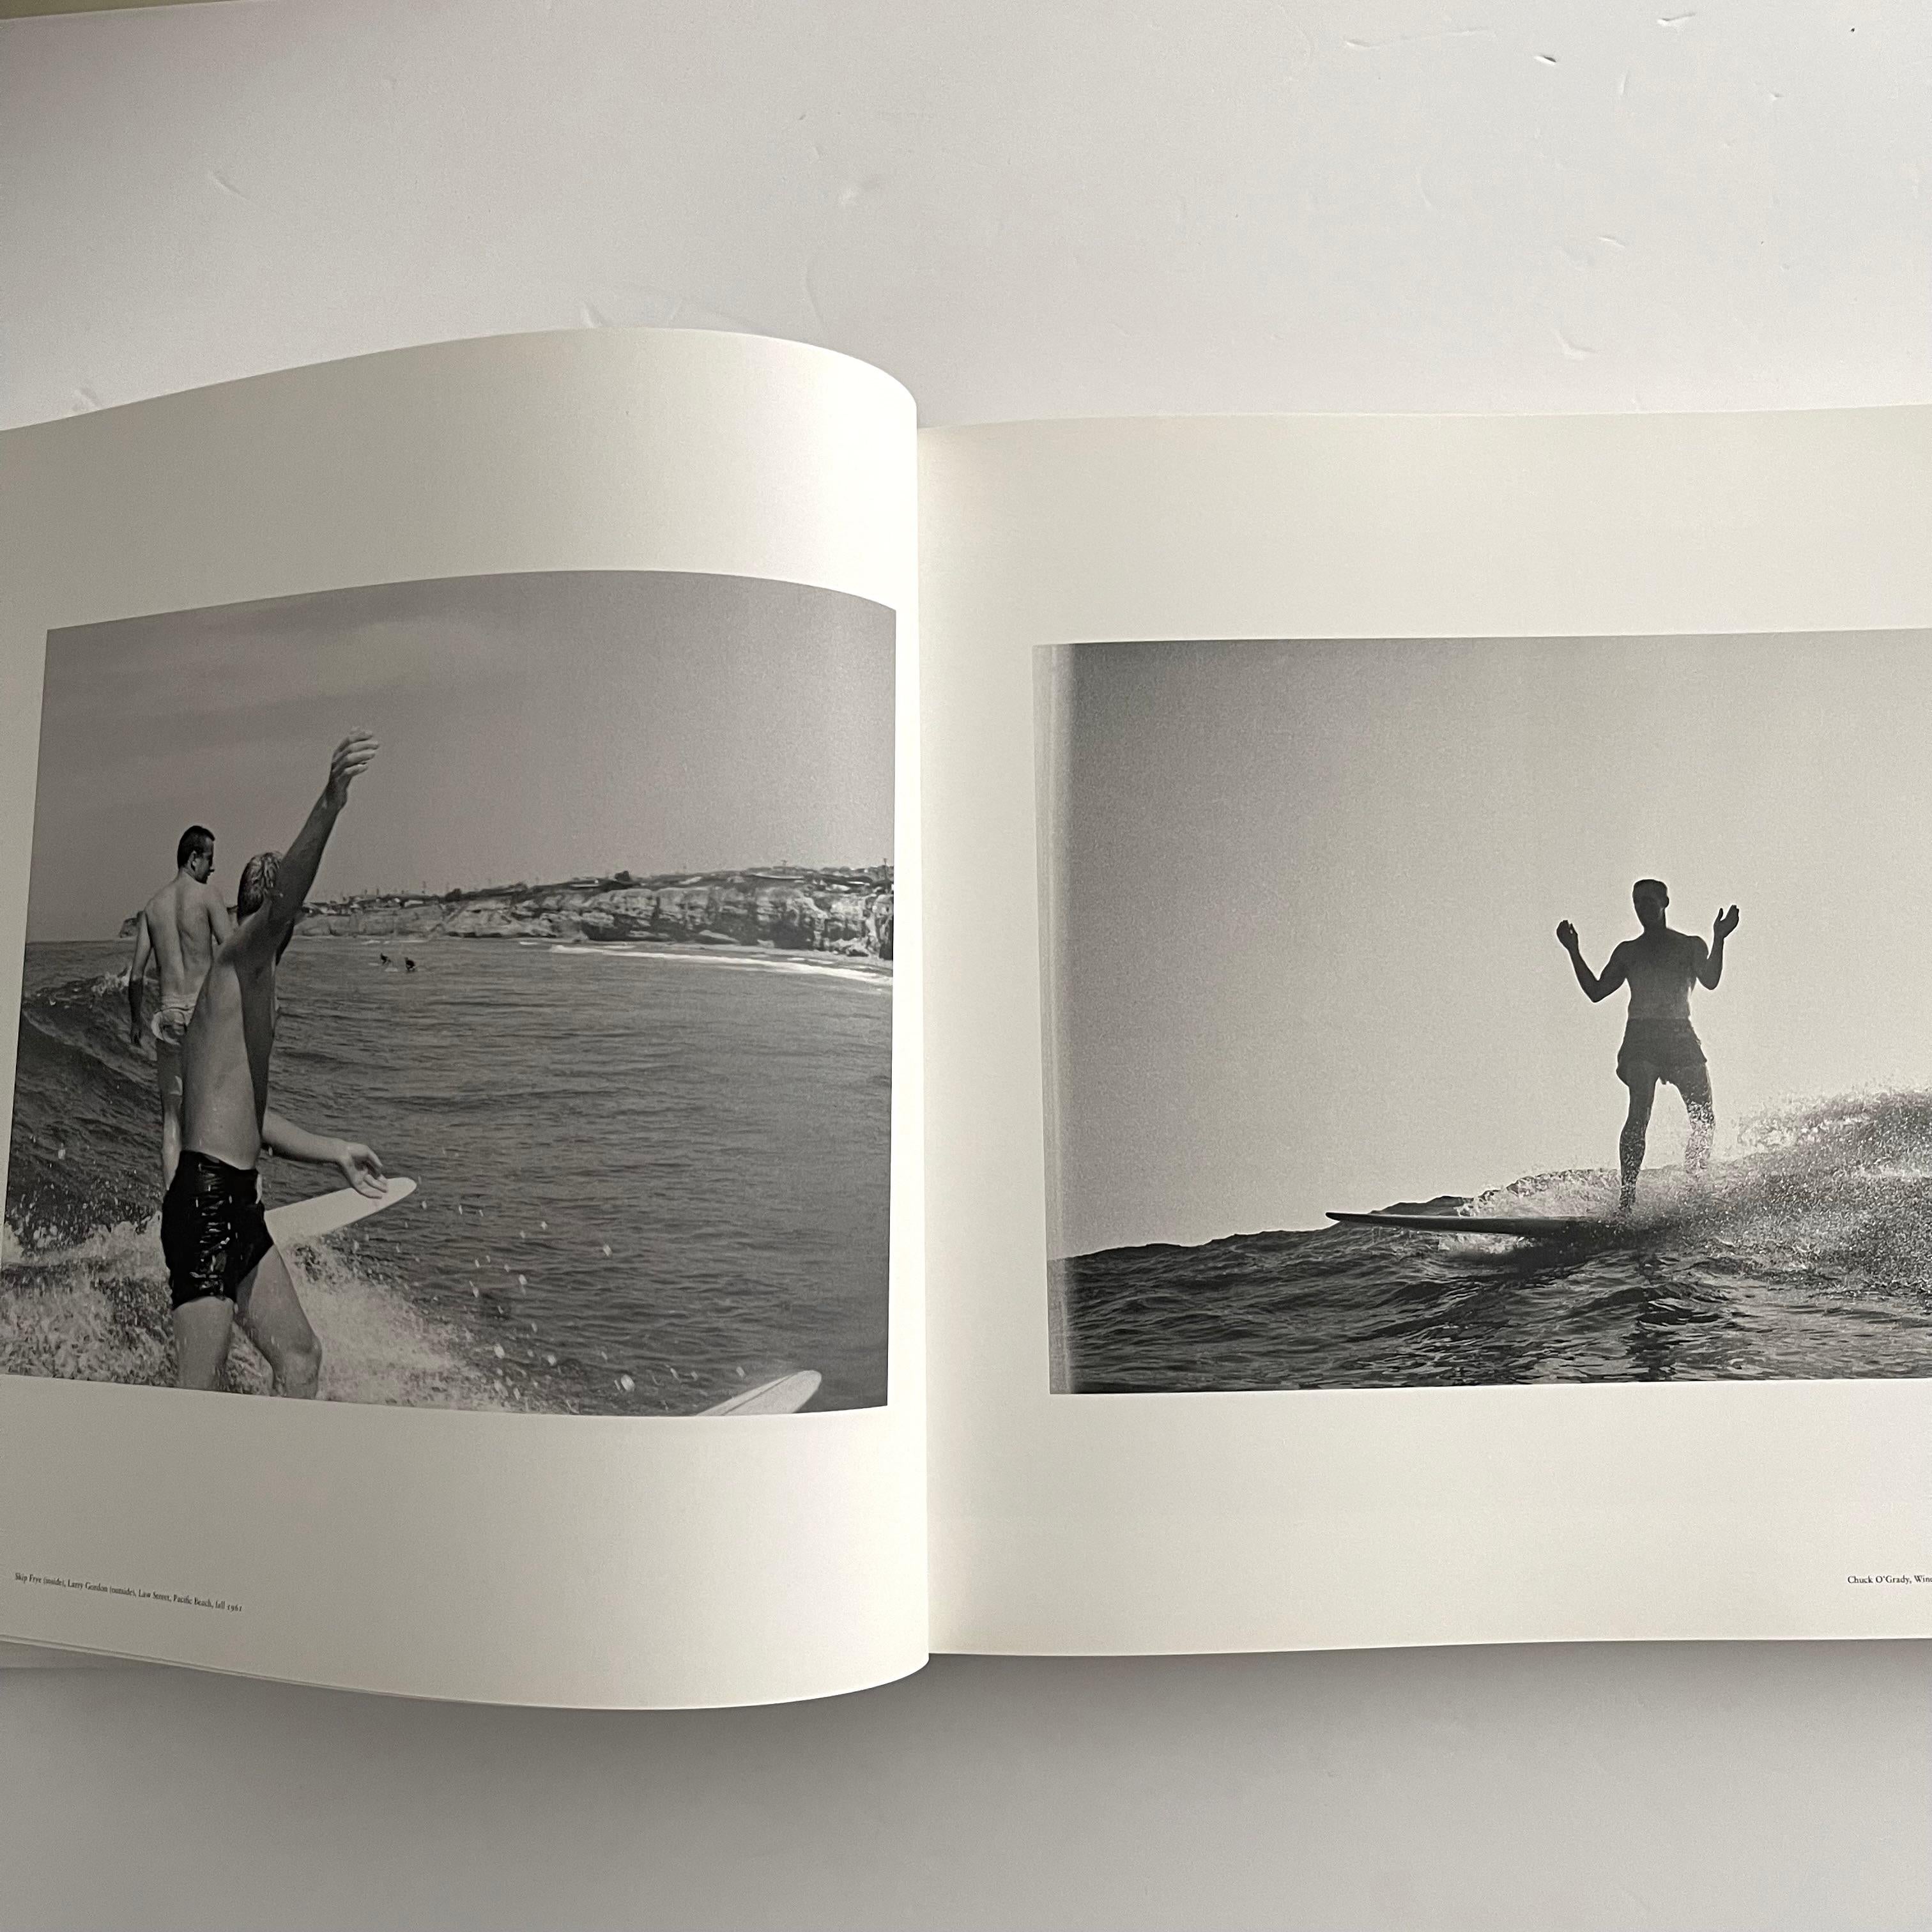 Co-published by T. Adler Books and the wave-rider's Bible, The Surfer's Journal, 1st edition 2006This collection of mostly previously unpublished vintage surfing photographs by the cult surf documentarian, Ron Church, offers a glimpse into the last